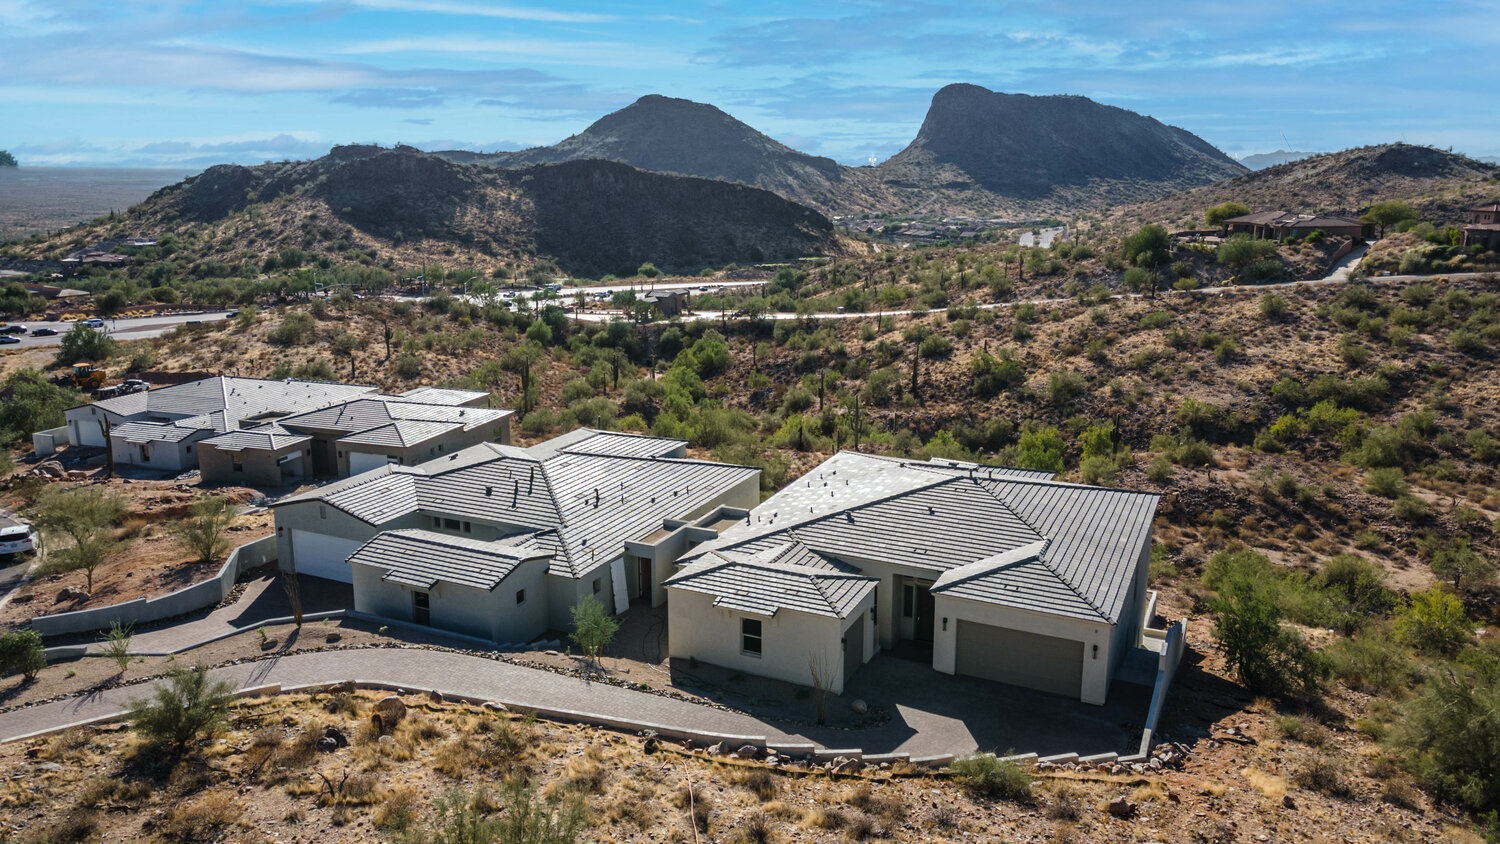 KLMR Homes, a Scottsdale-based homebuilder, has opened its first project – Bellos at The Summit in Fountain Hills.